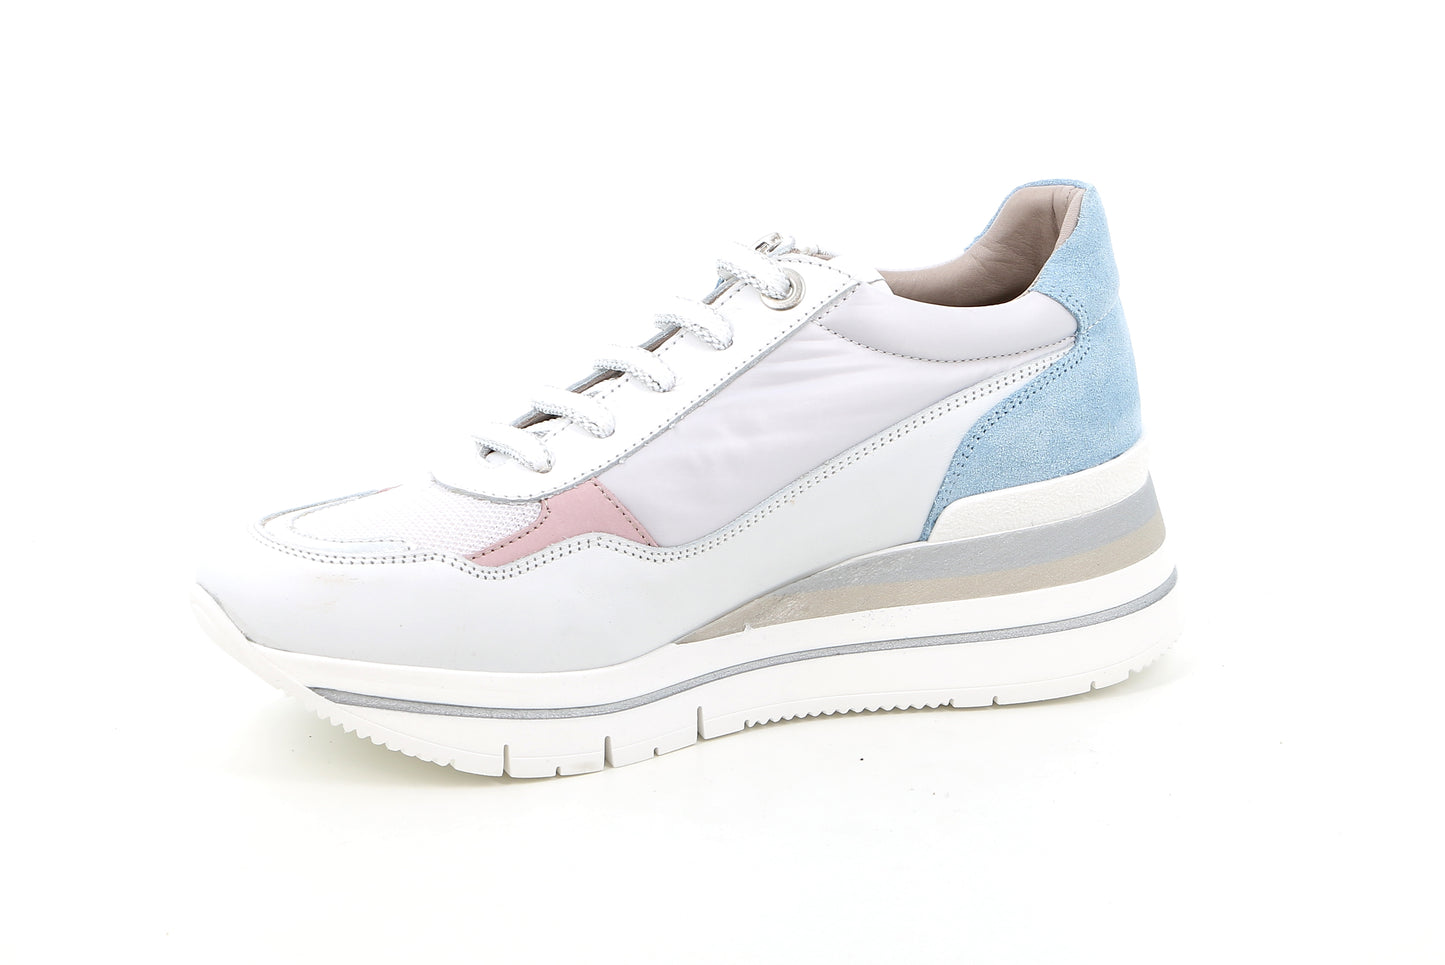 Sher SC2851 sneakers